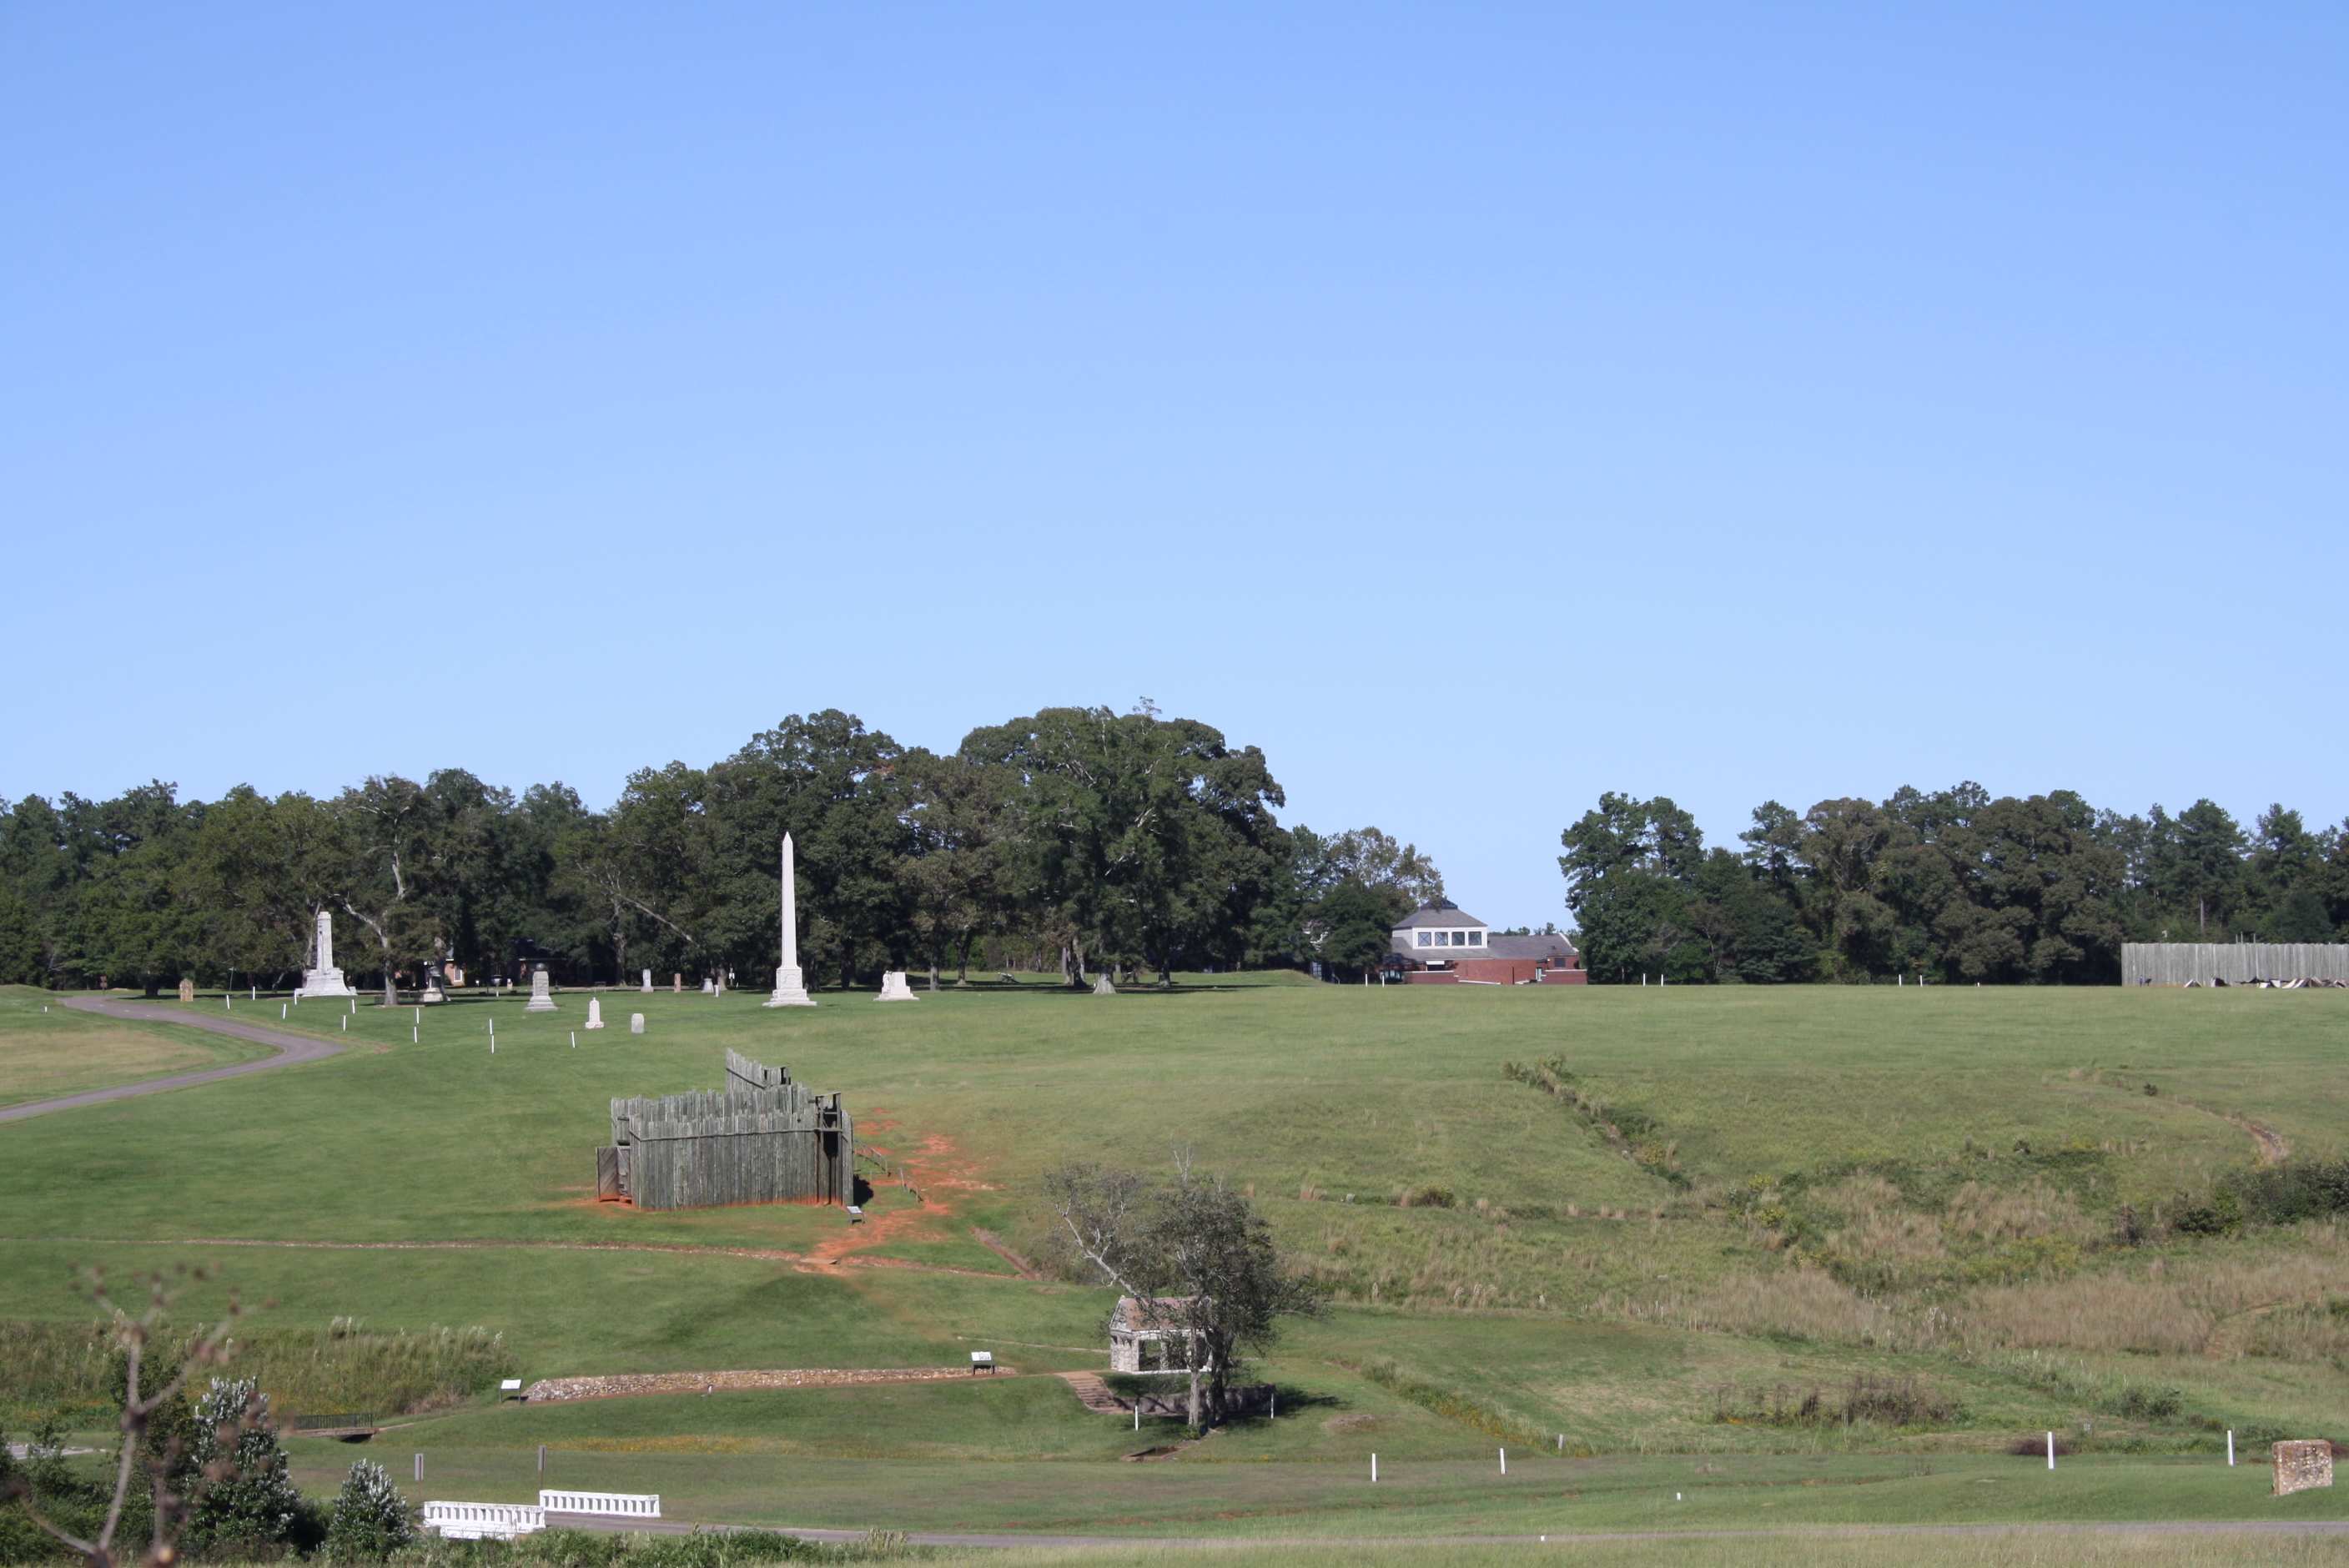 The prison site at Andersonville is adjacent to the National Prisoner of War Museum (shown in the background) and about one-third of a mile from the national cemetery (not shown). Andersonville National Historic Site 